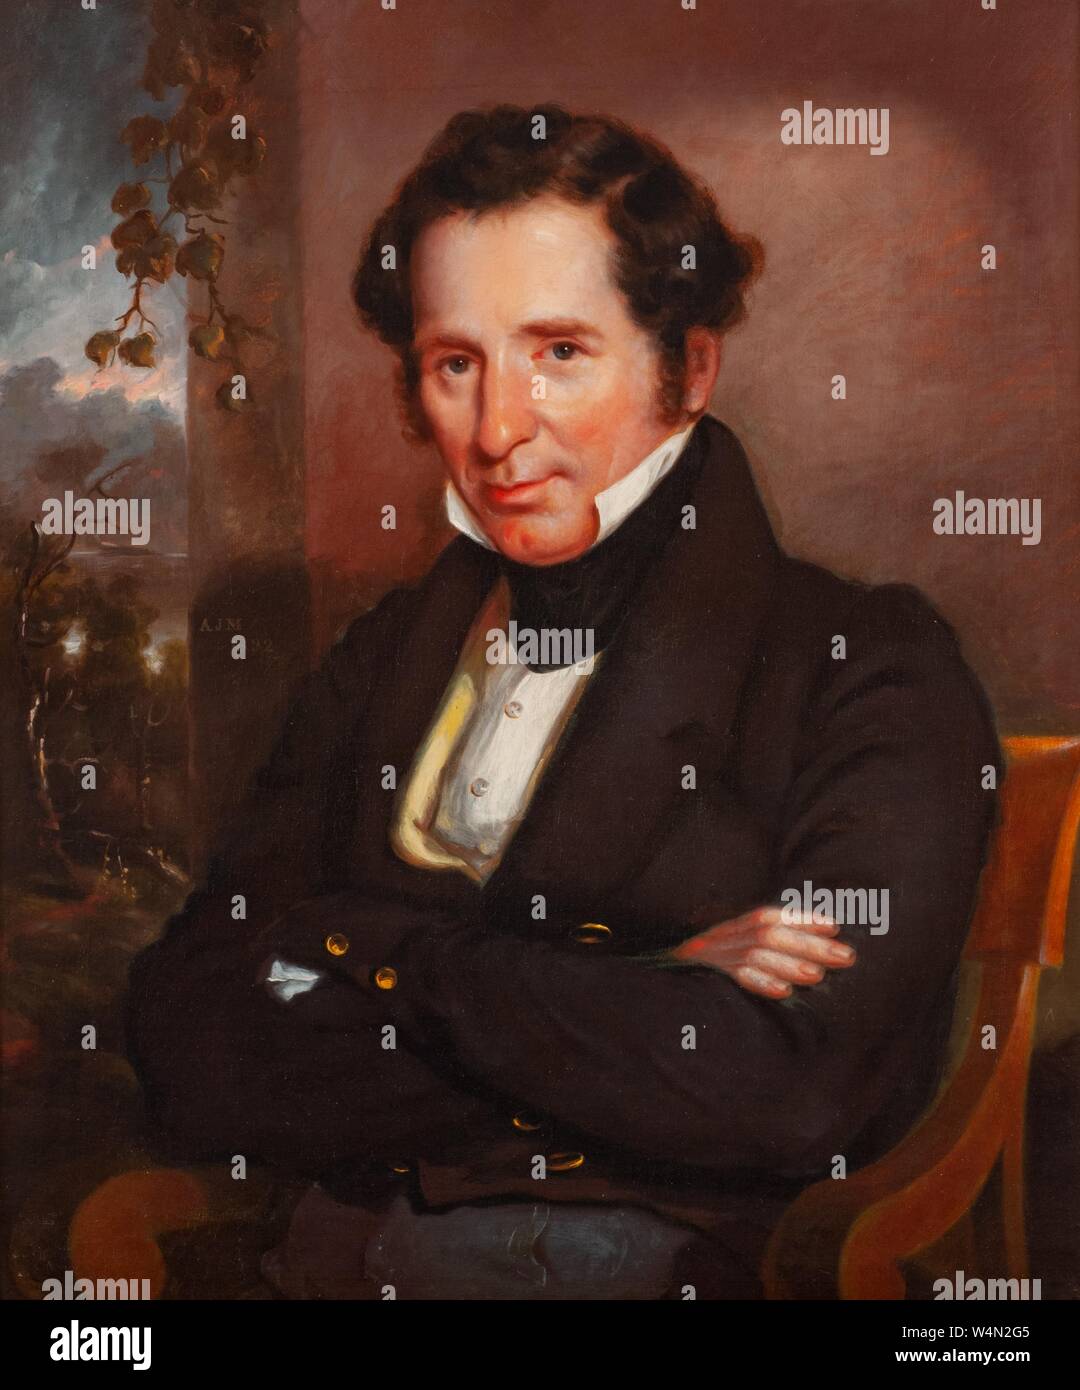 Portrait painting of Johns Hopkins, founder of the Johns Hopkins University in Baltimore Maryland, seated, with his arms crossed and a relaxed expression on his face, August 16, 2007. From the Homewood Photography Collection. () Stock Photo